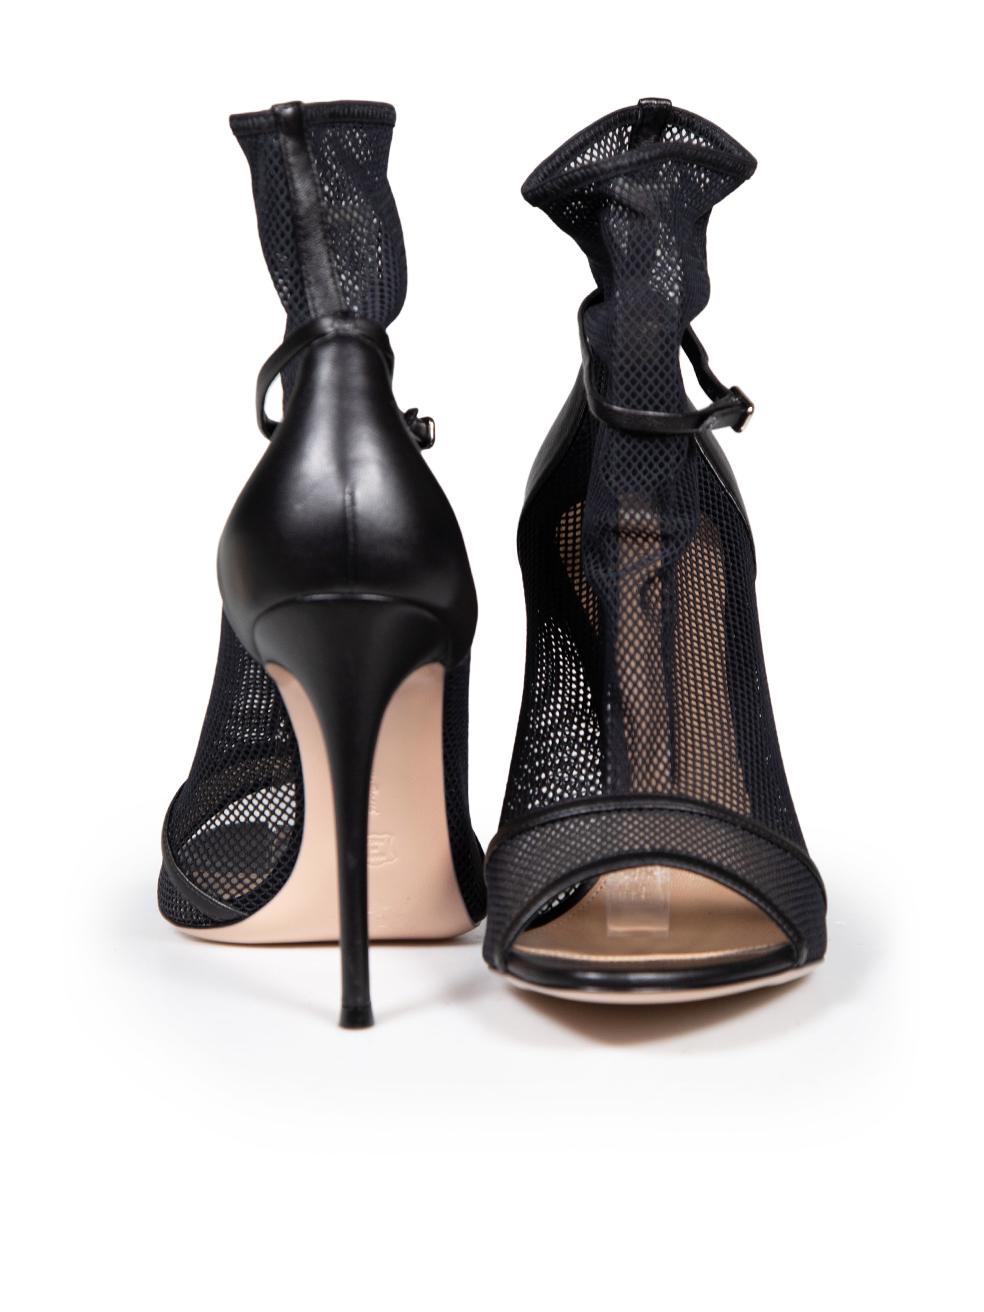 Gianvito Rossi Black Leather & Mesh Idol Open Toe Ankle Heels Size IT 41 In Excellent Condition For Sale In London, GB